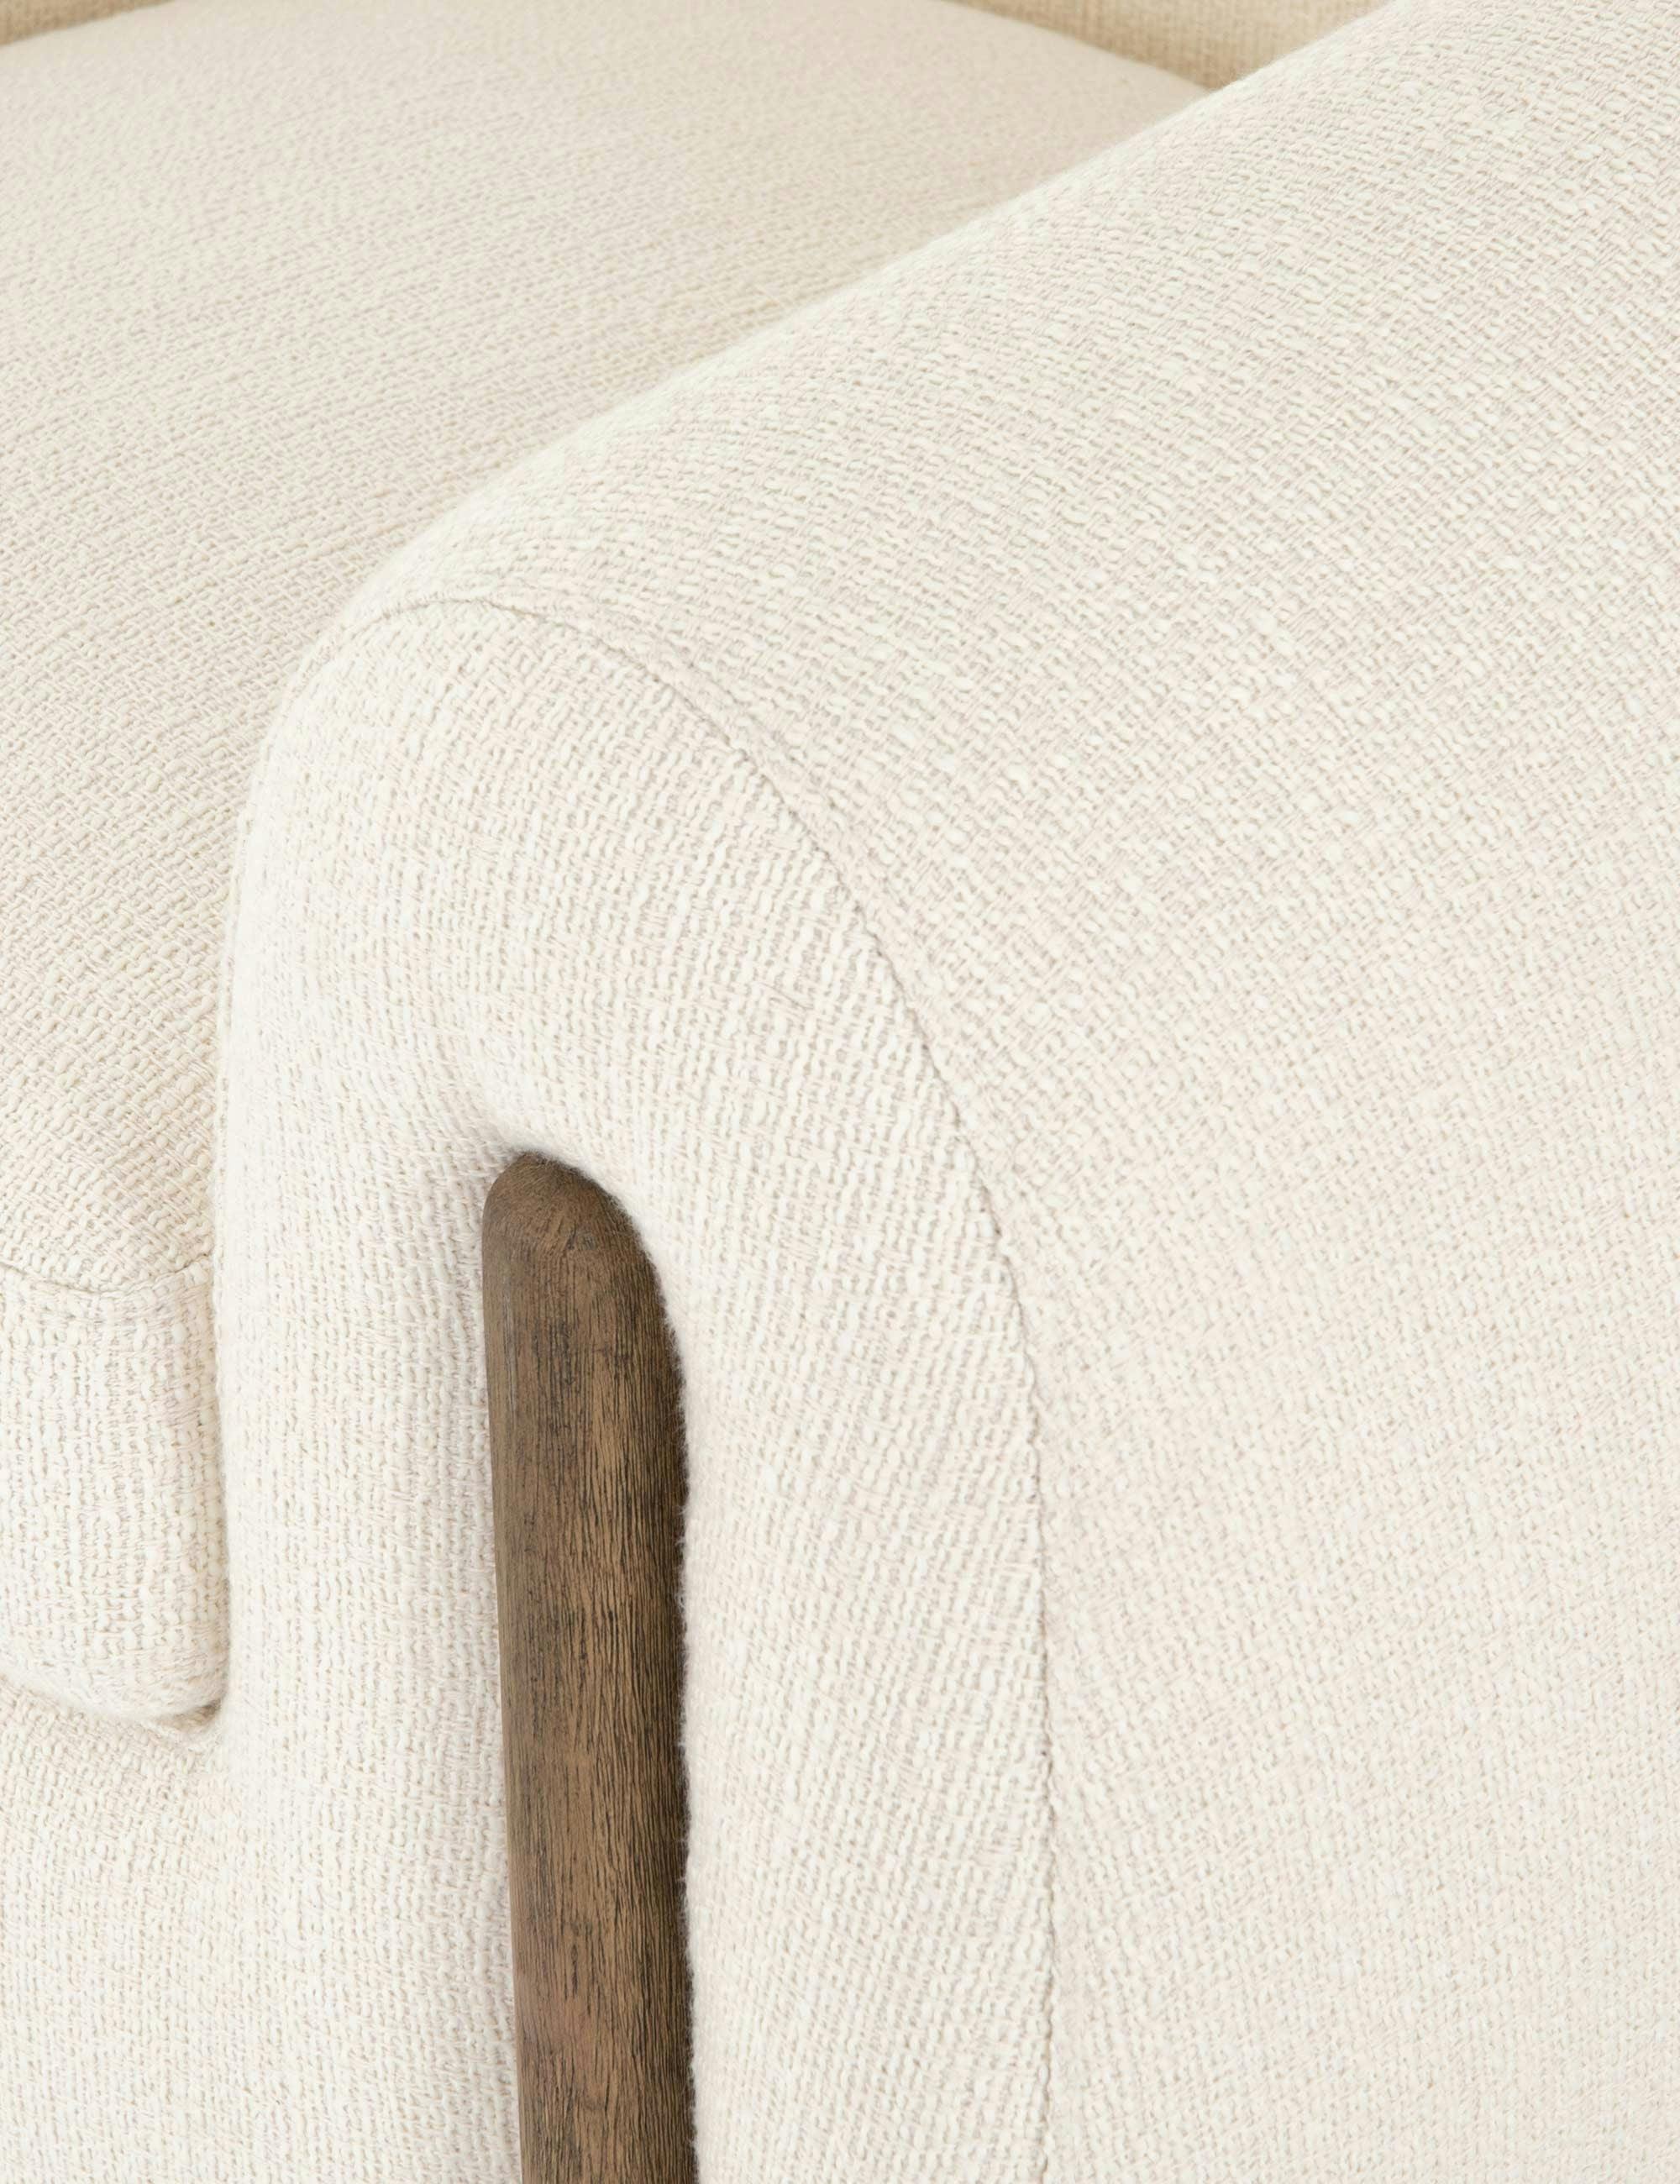 Kerbey Ivory Barrel Accent Chair in Sustainably Sourced Leather and Wood